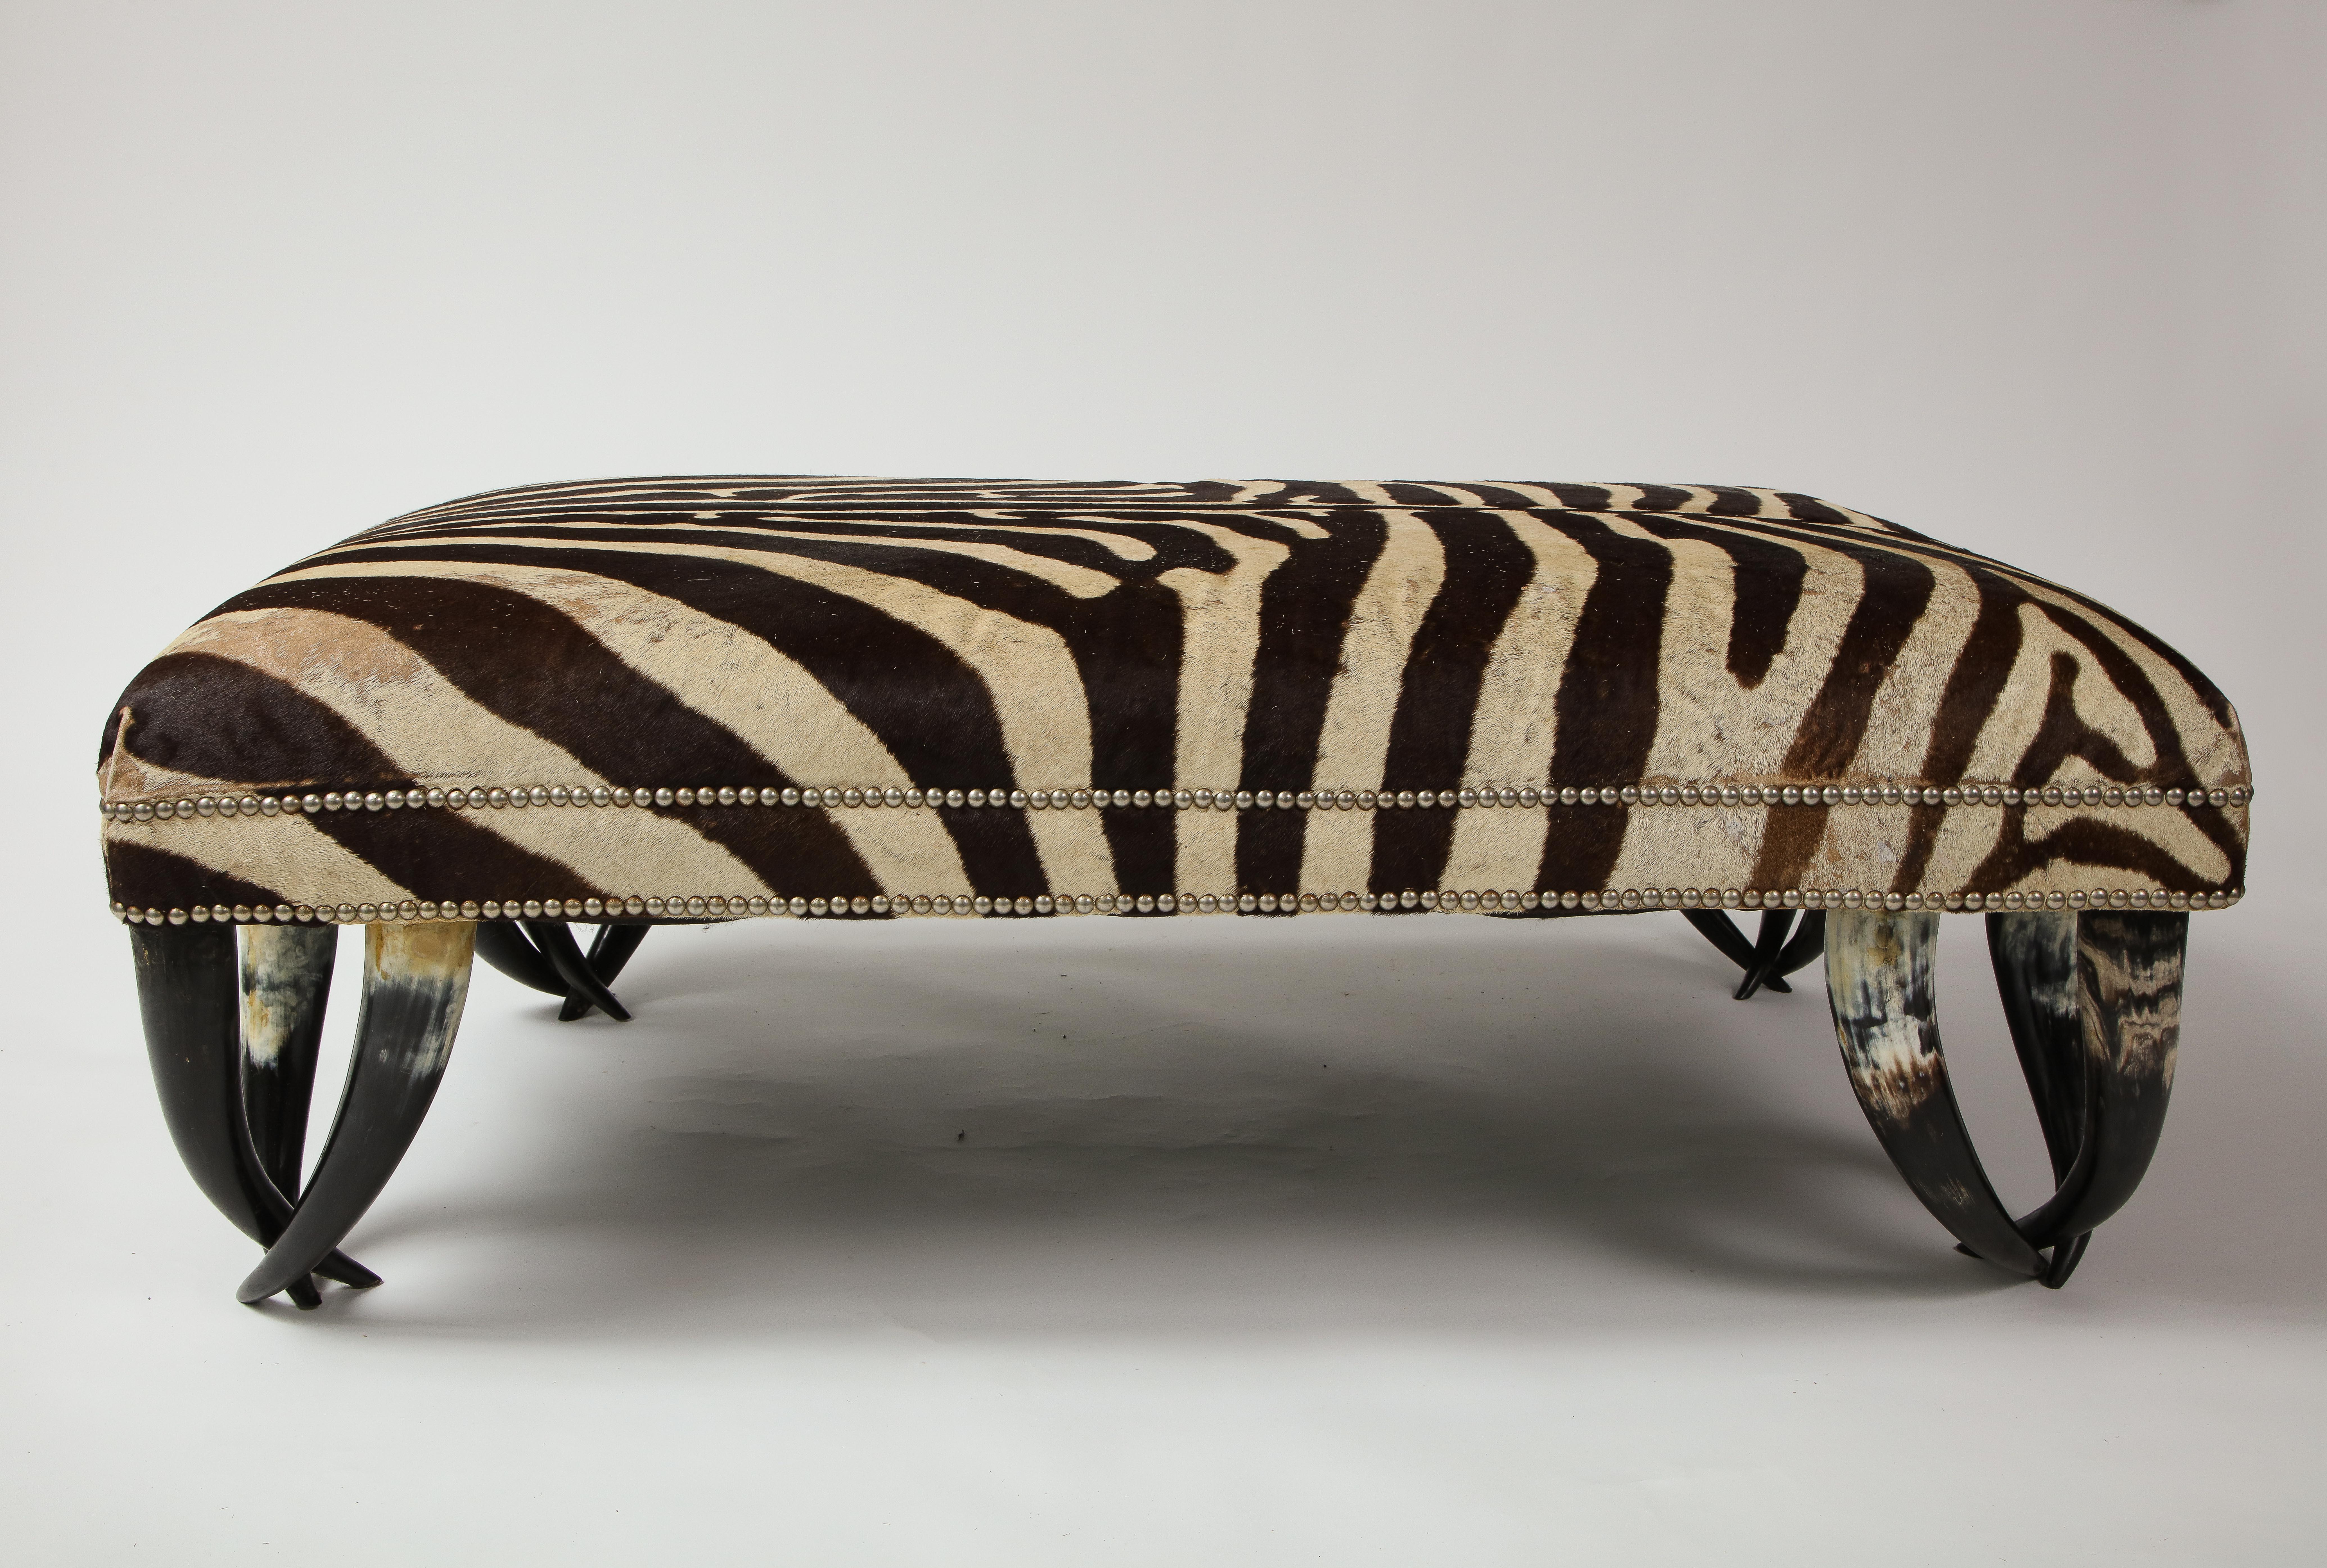 The rectangular seat covered in an antique zebra hide with two rows of silver nailheads; raised on steer horns.